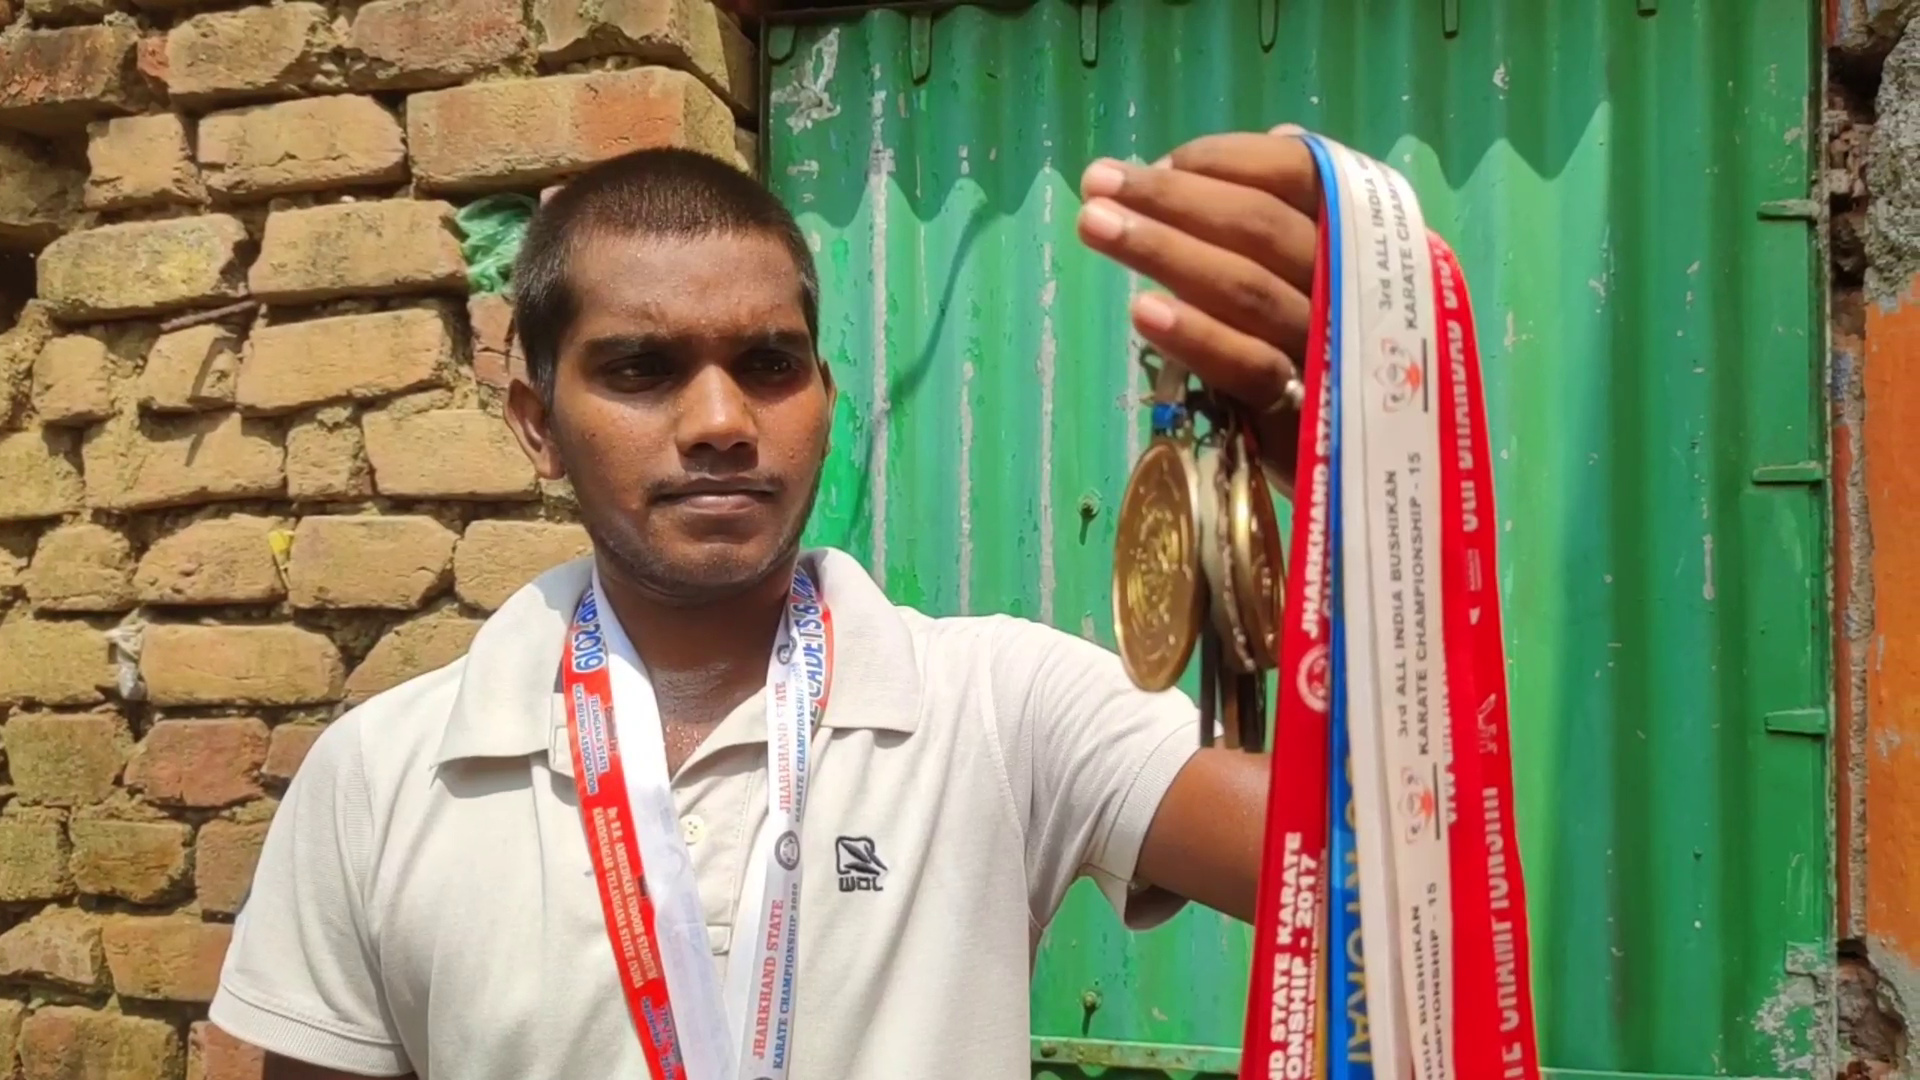 Saurabh Bharti with his medal